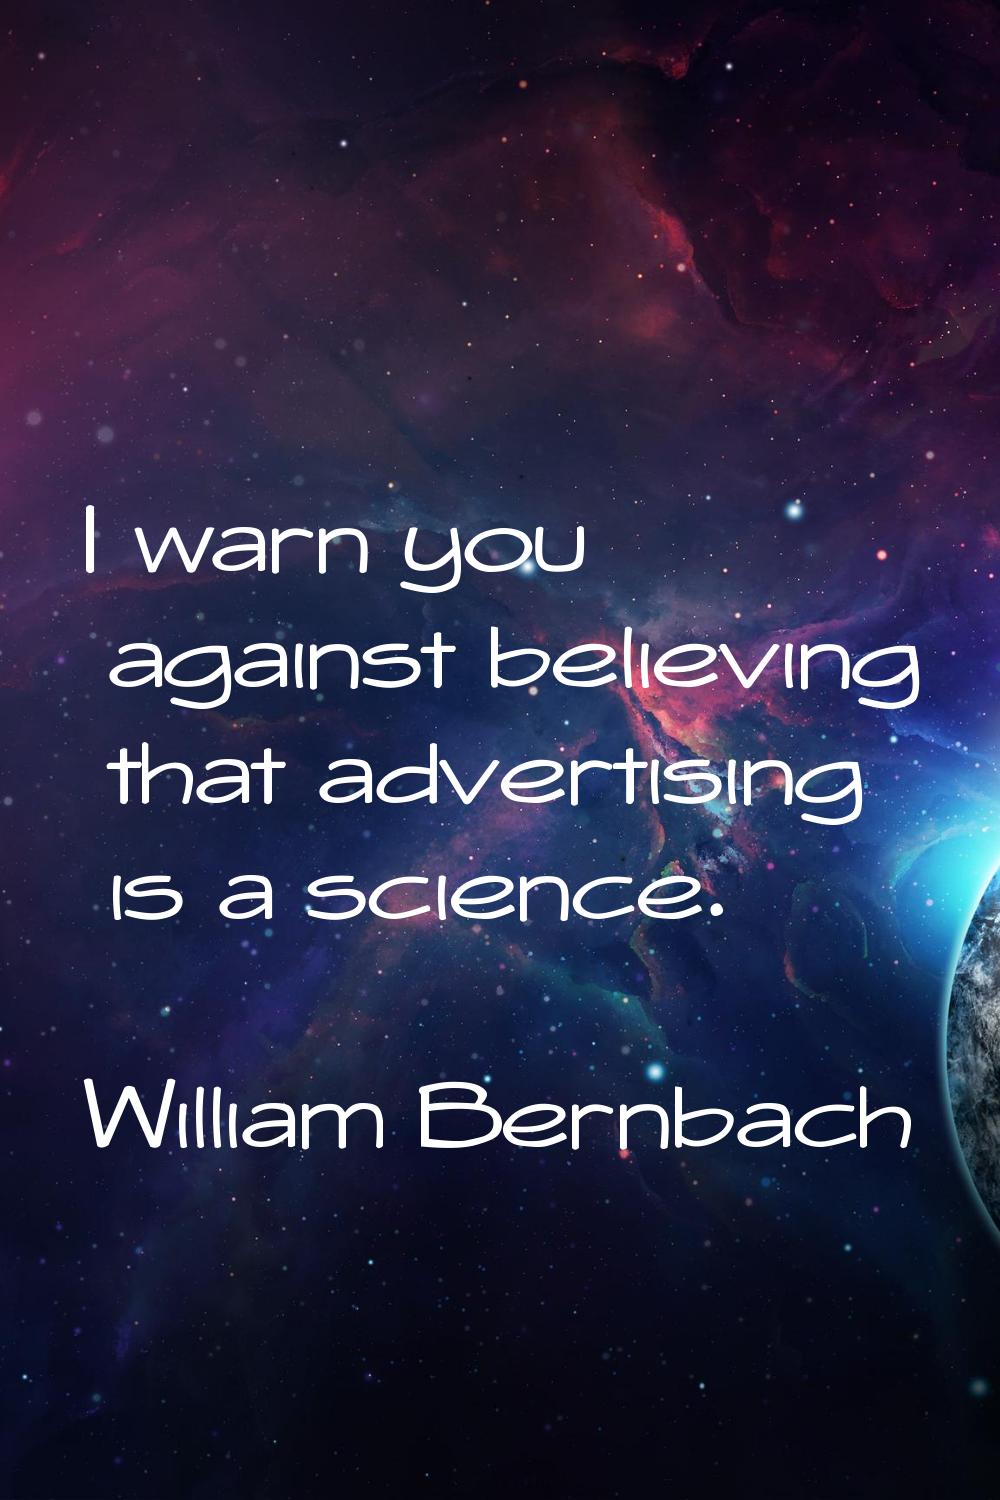 I warn you against believing that advertising is a science.